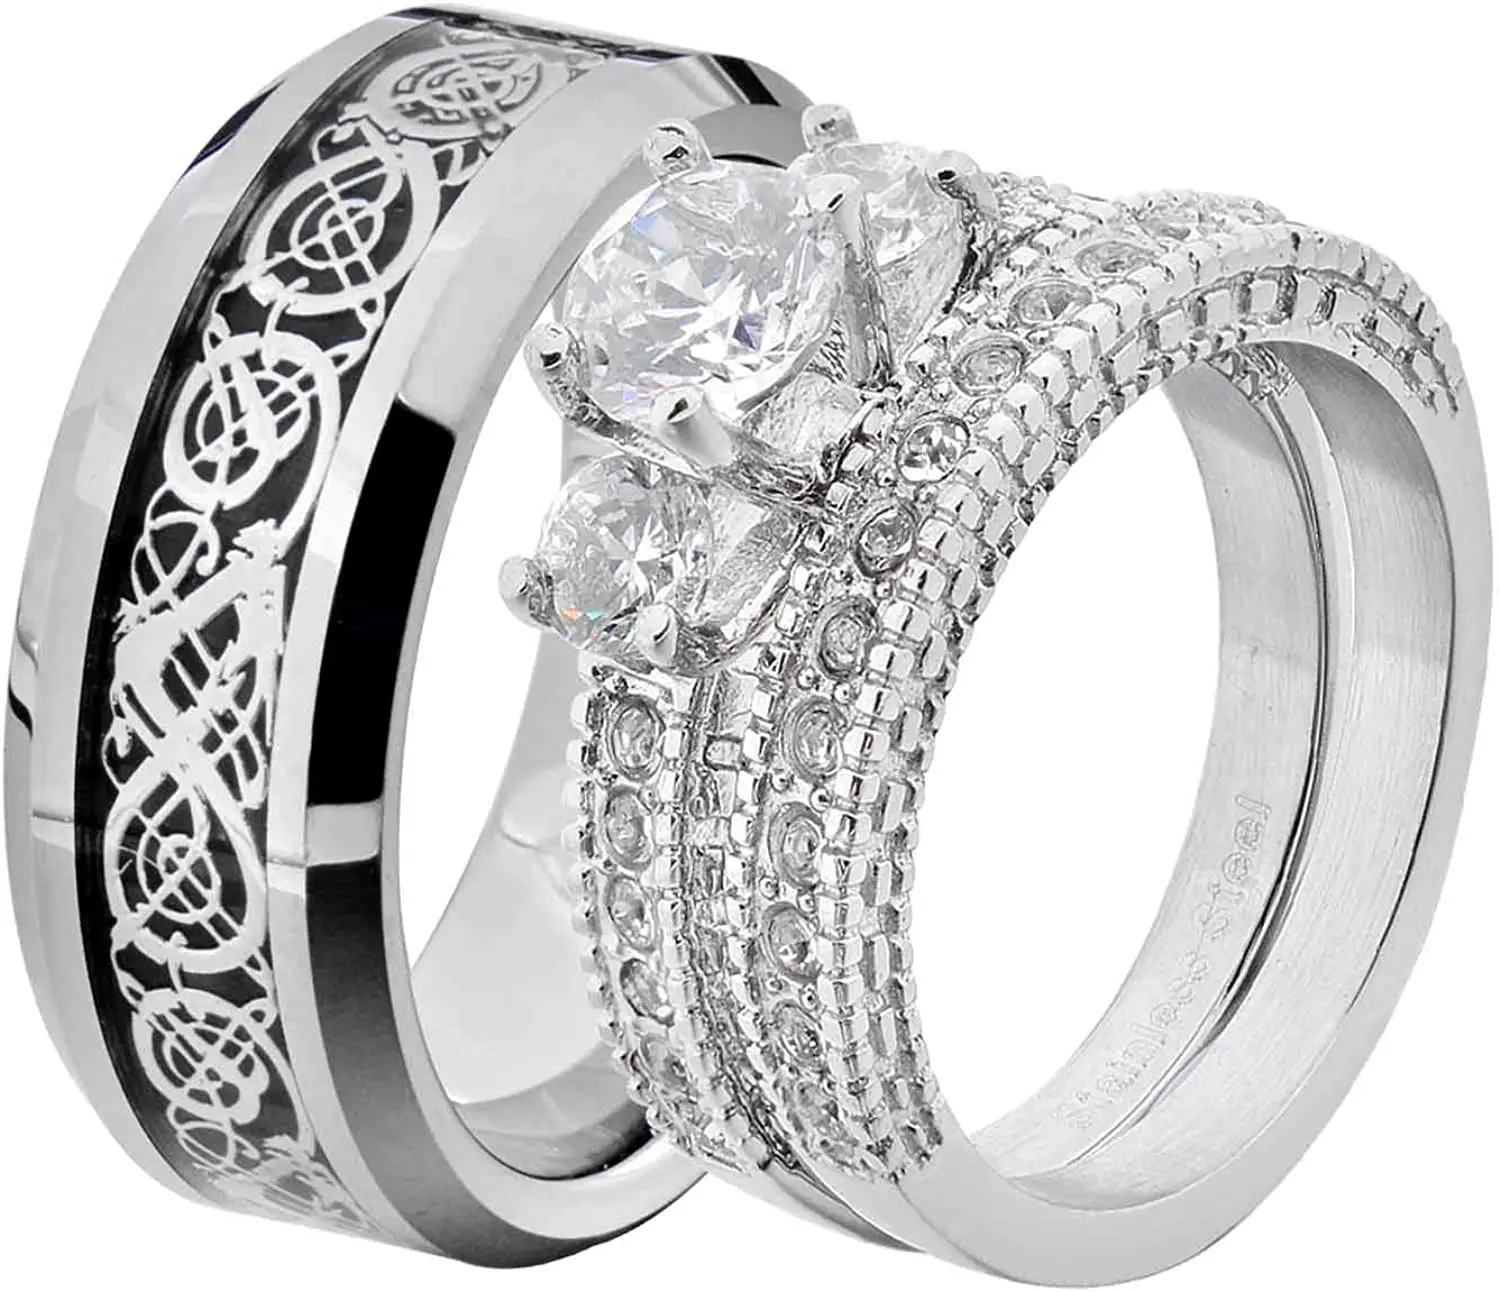 Amazon.com: His and Hers Wedding Ring Sets Couple Ring Bridal Sets ...